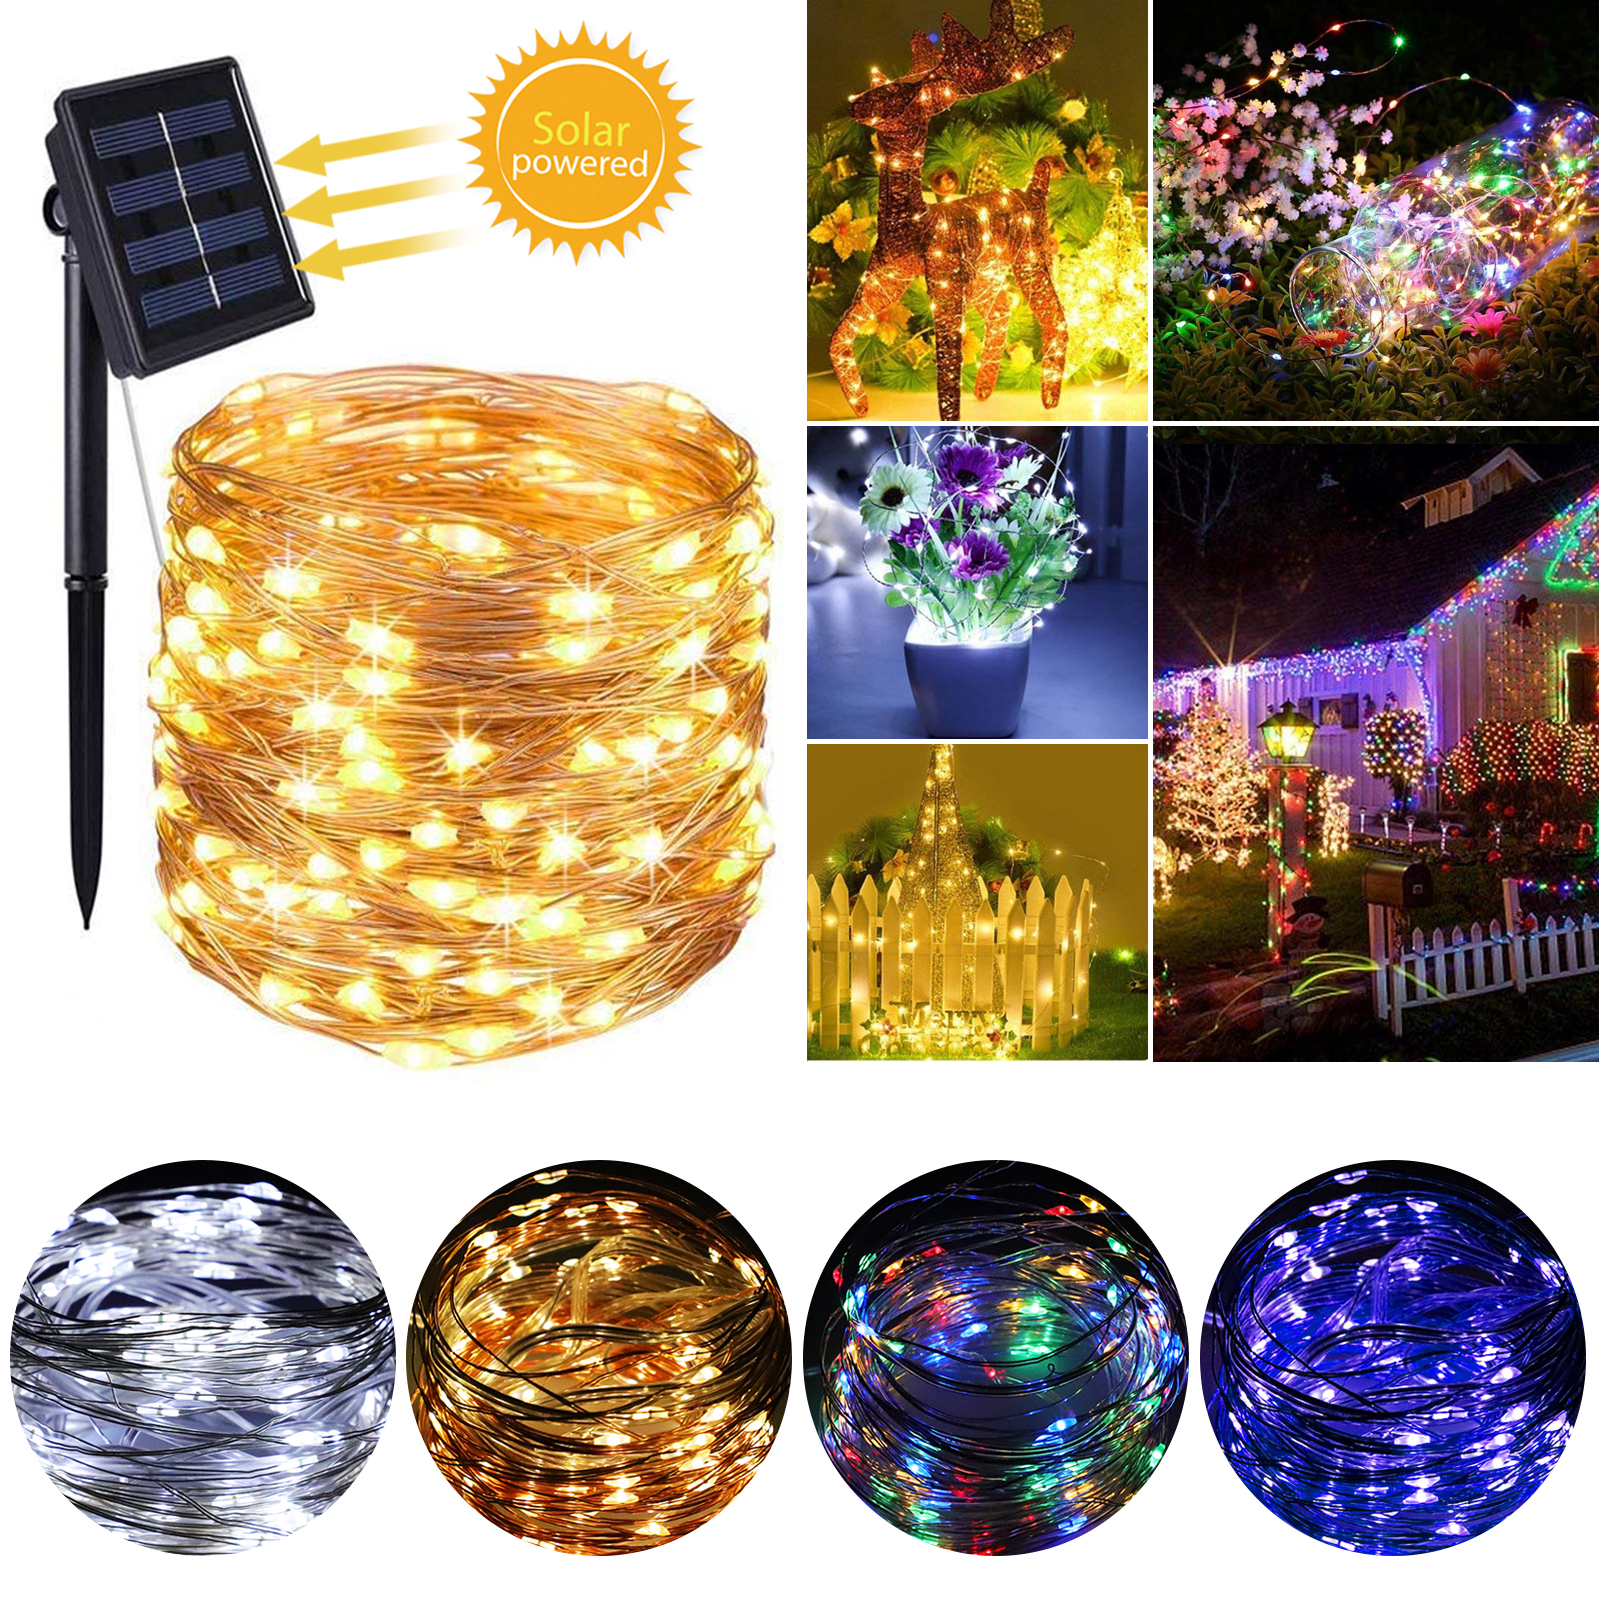 200 LED Solar LED Fairy String Lights Copper Wire Waterproof Garden Party Decor 